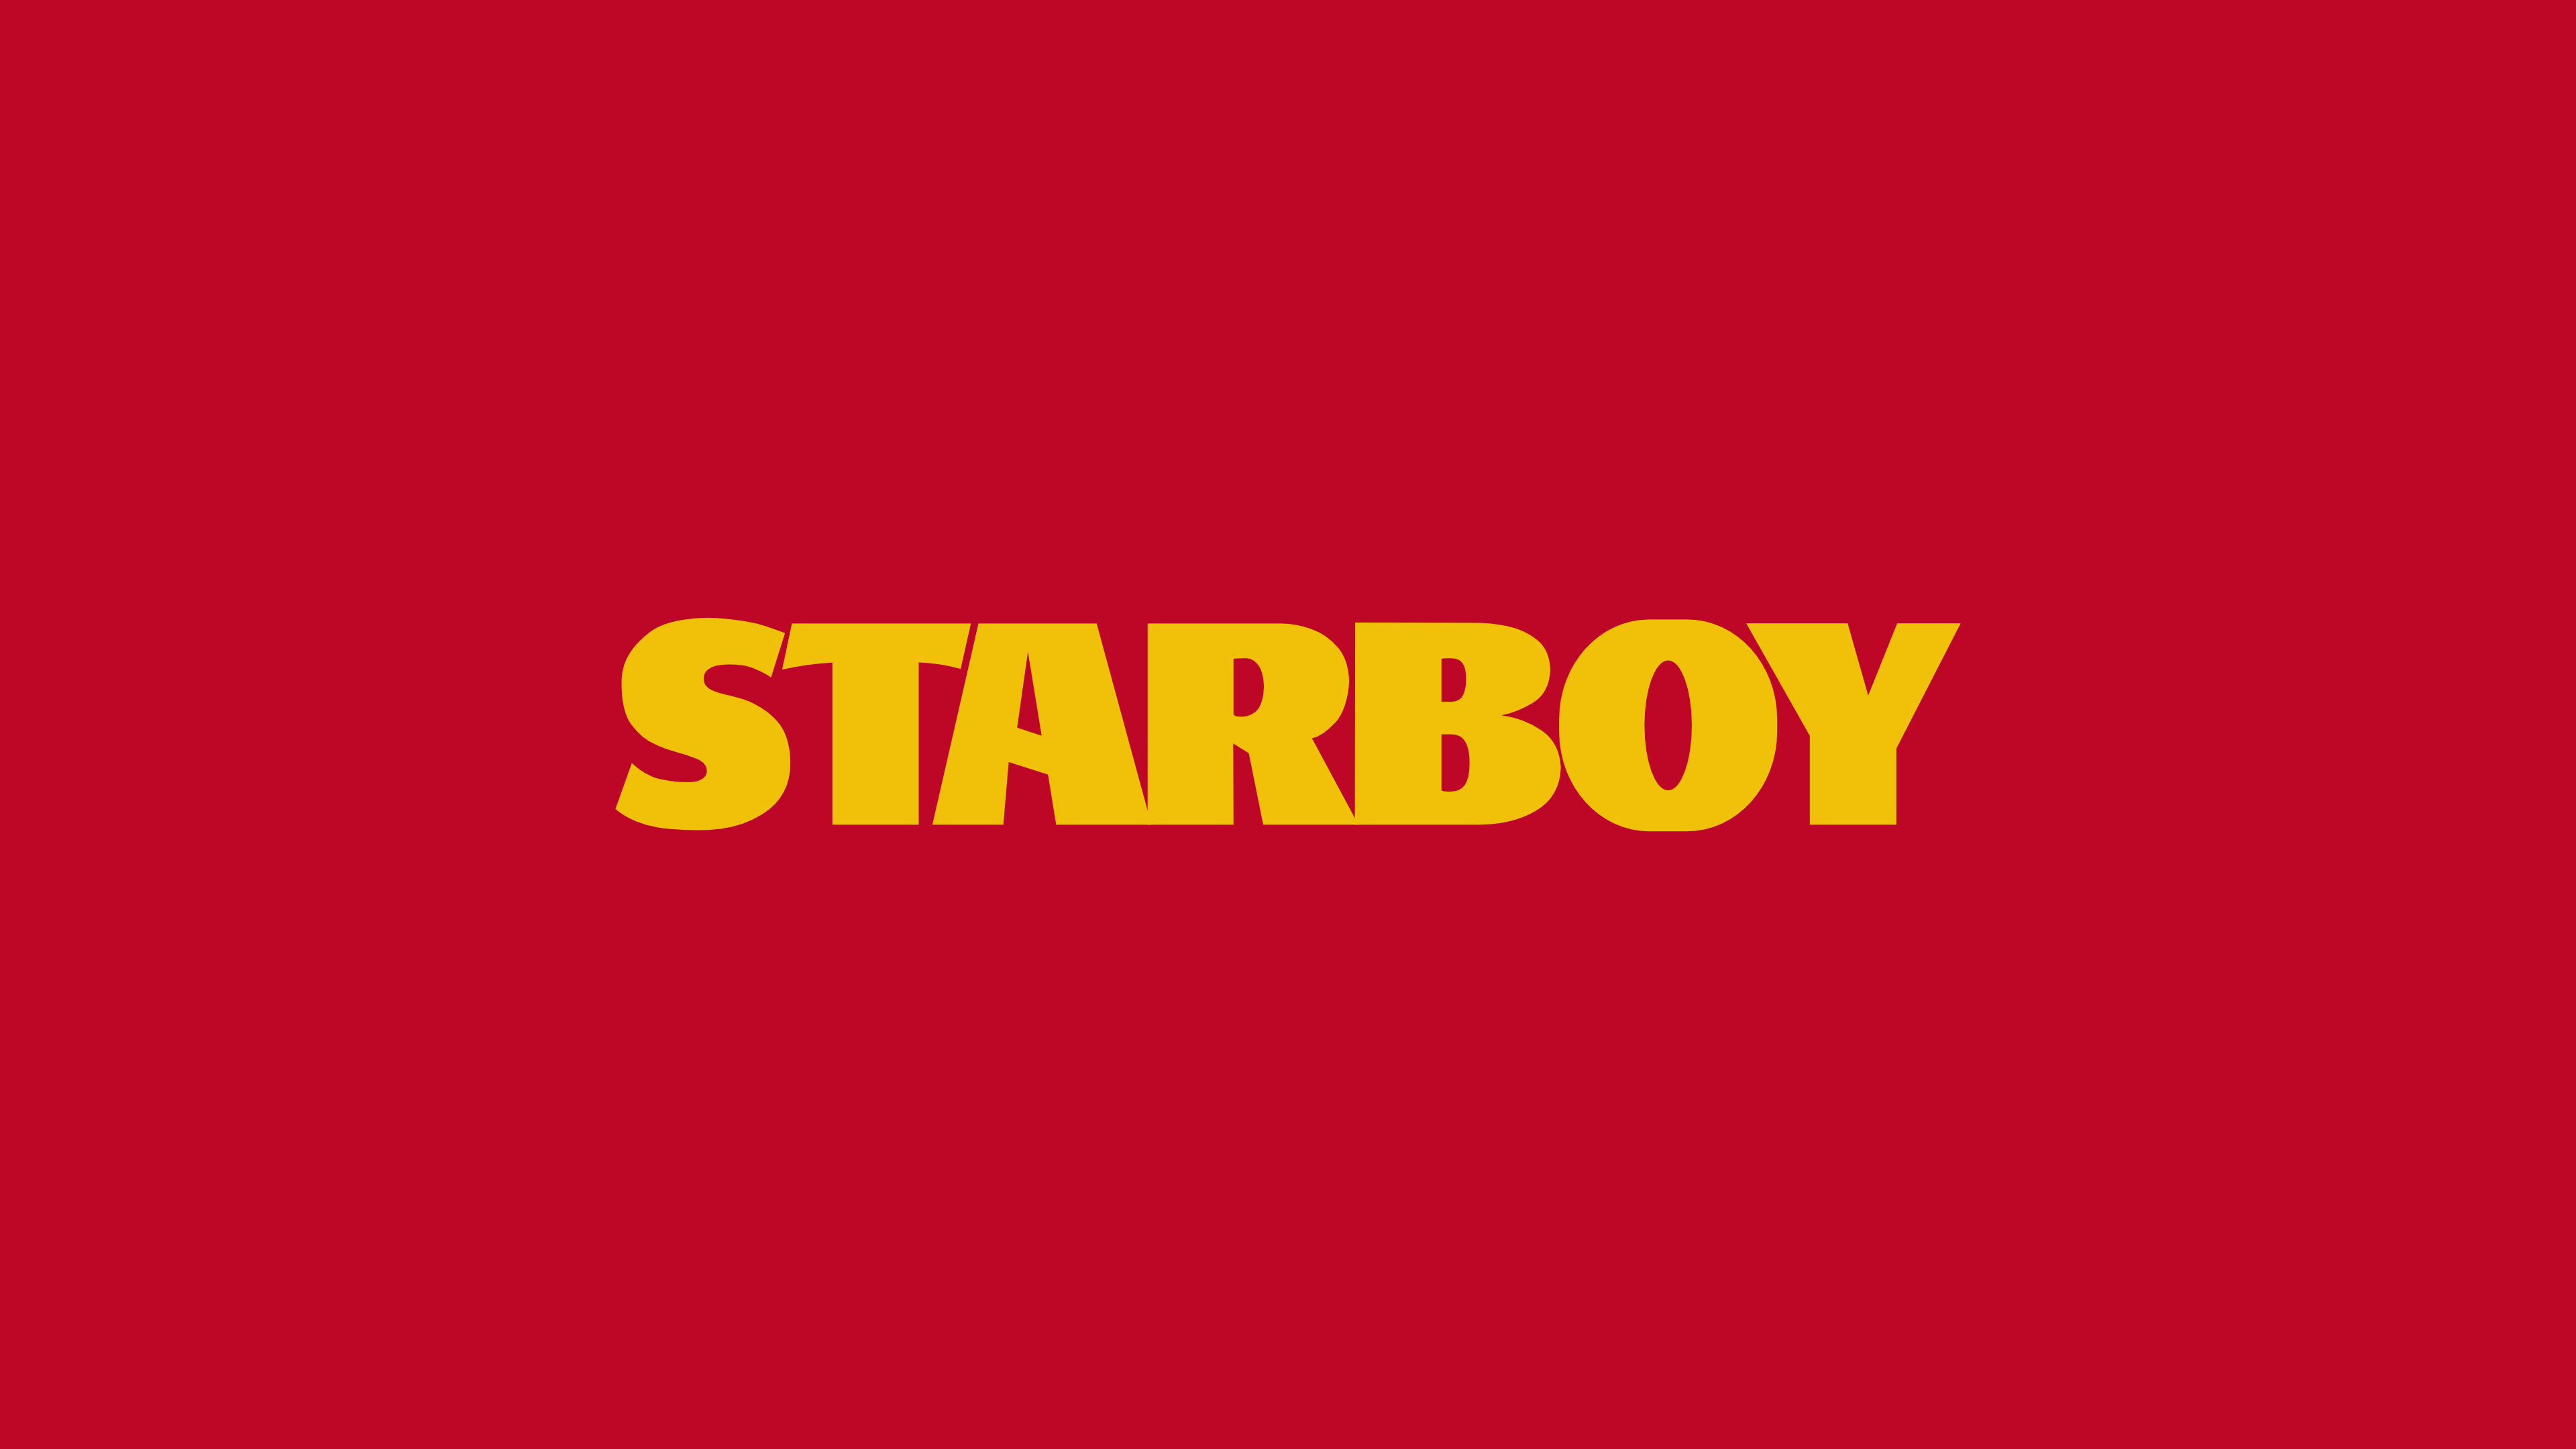 Starboy обложка. The Weeknd. Starboy. Starboy обои. Старбой the weekend. Star boy the weekend